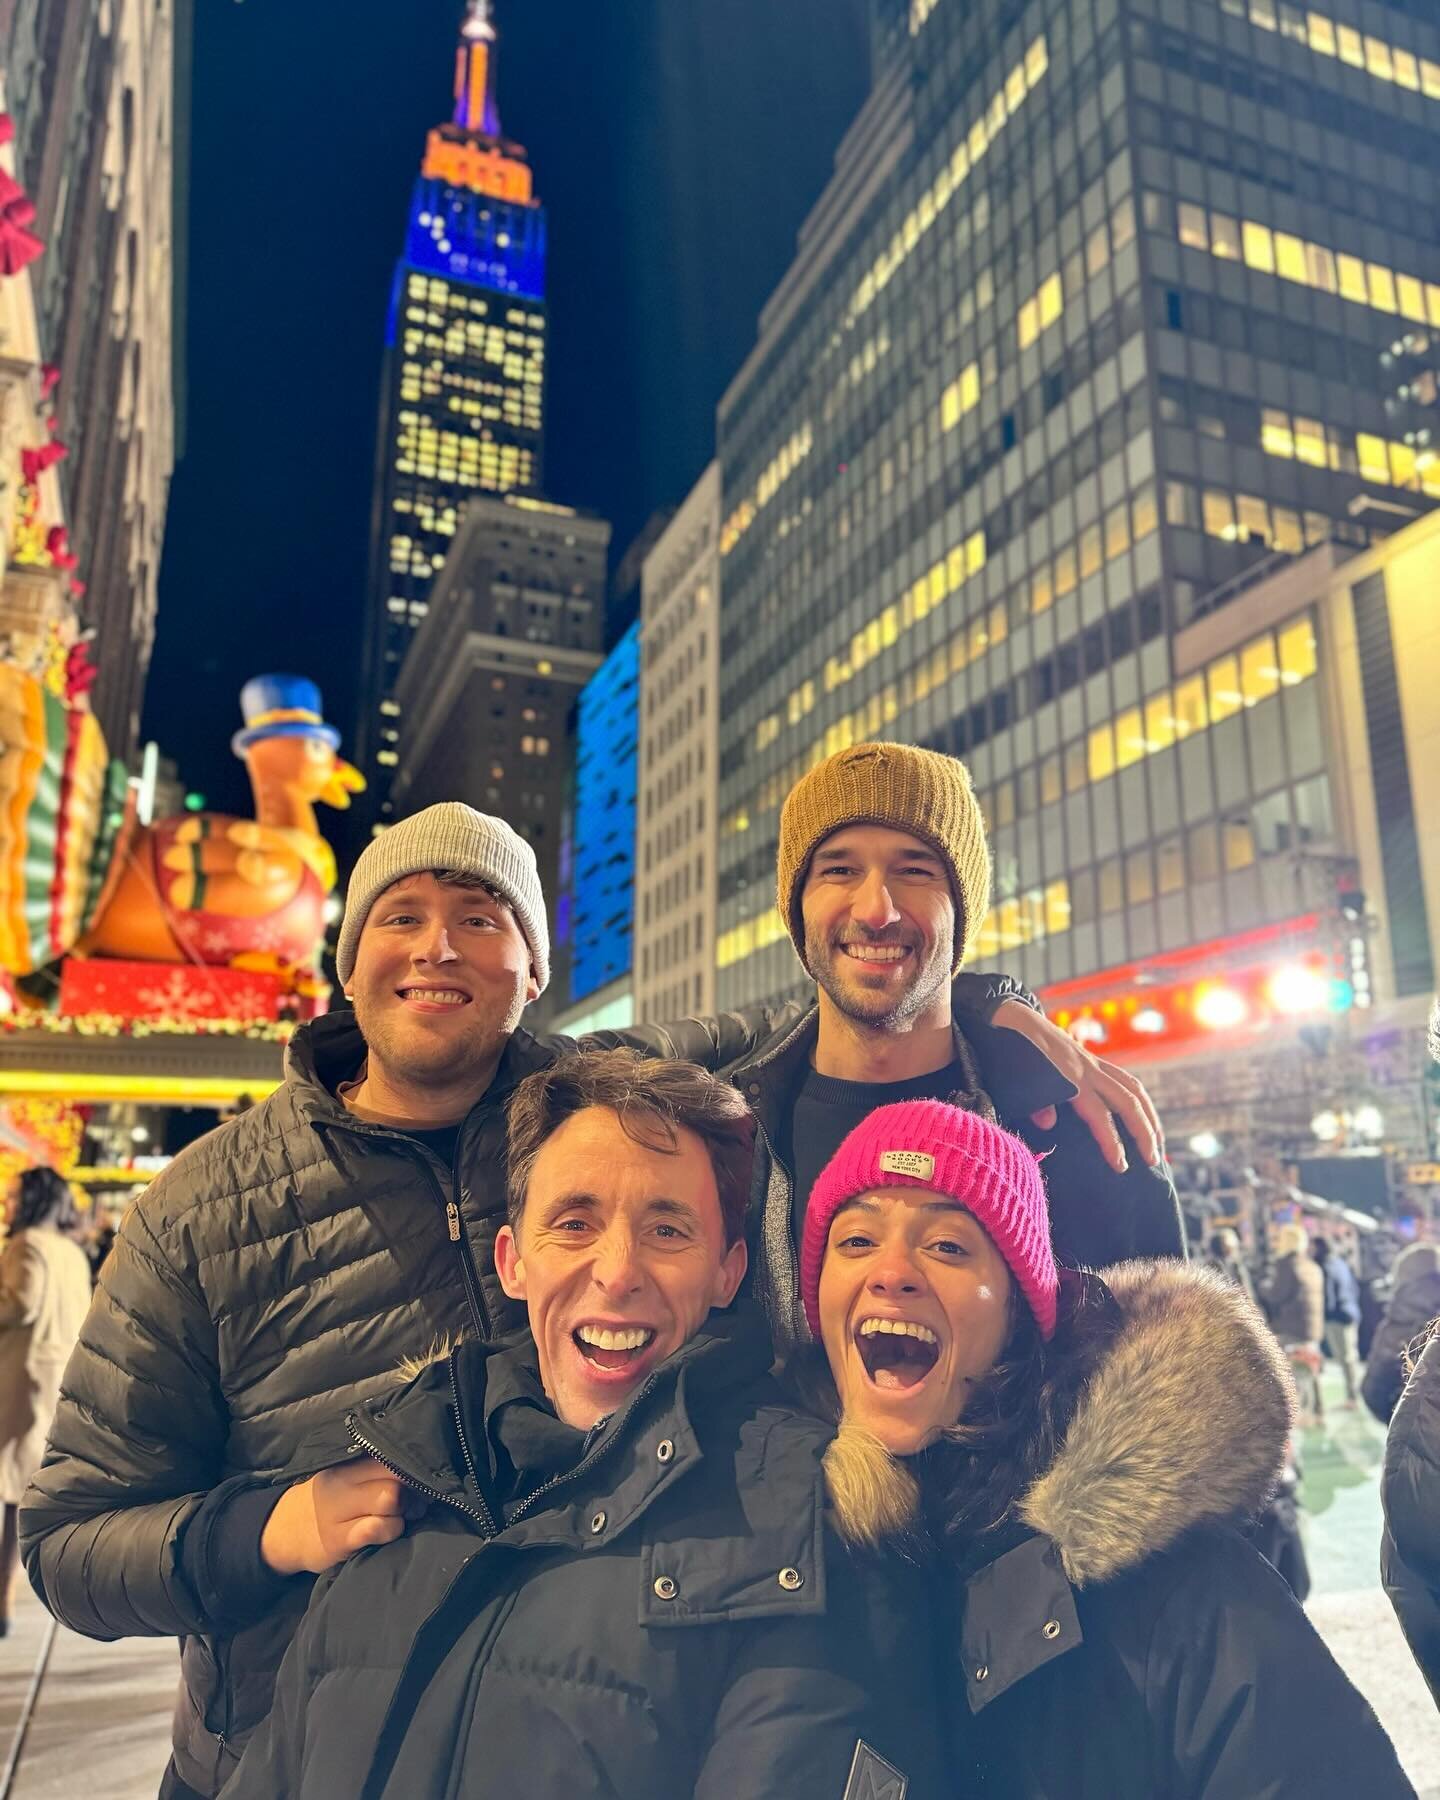 Shuckin&rsquo; live into your living rooms before your first bite of turkey. Catch @shuckedmusical in the #MacysParade tomorrow morning.